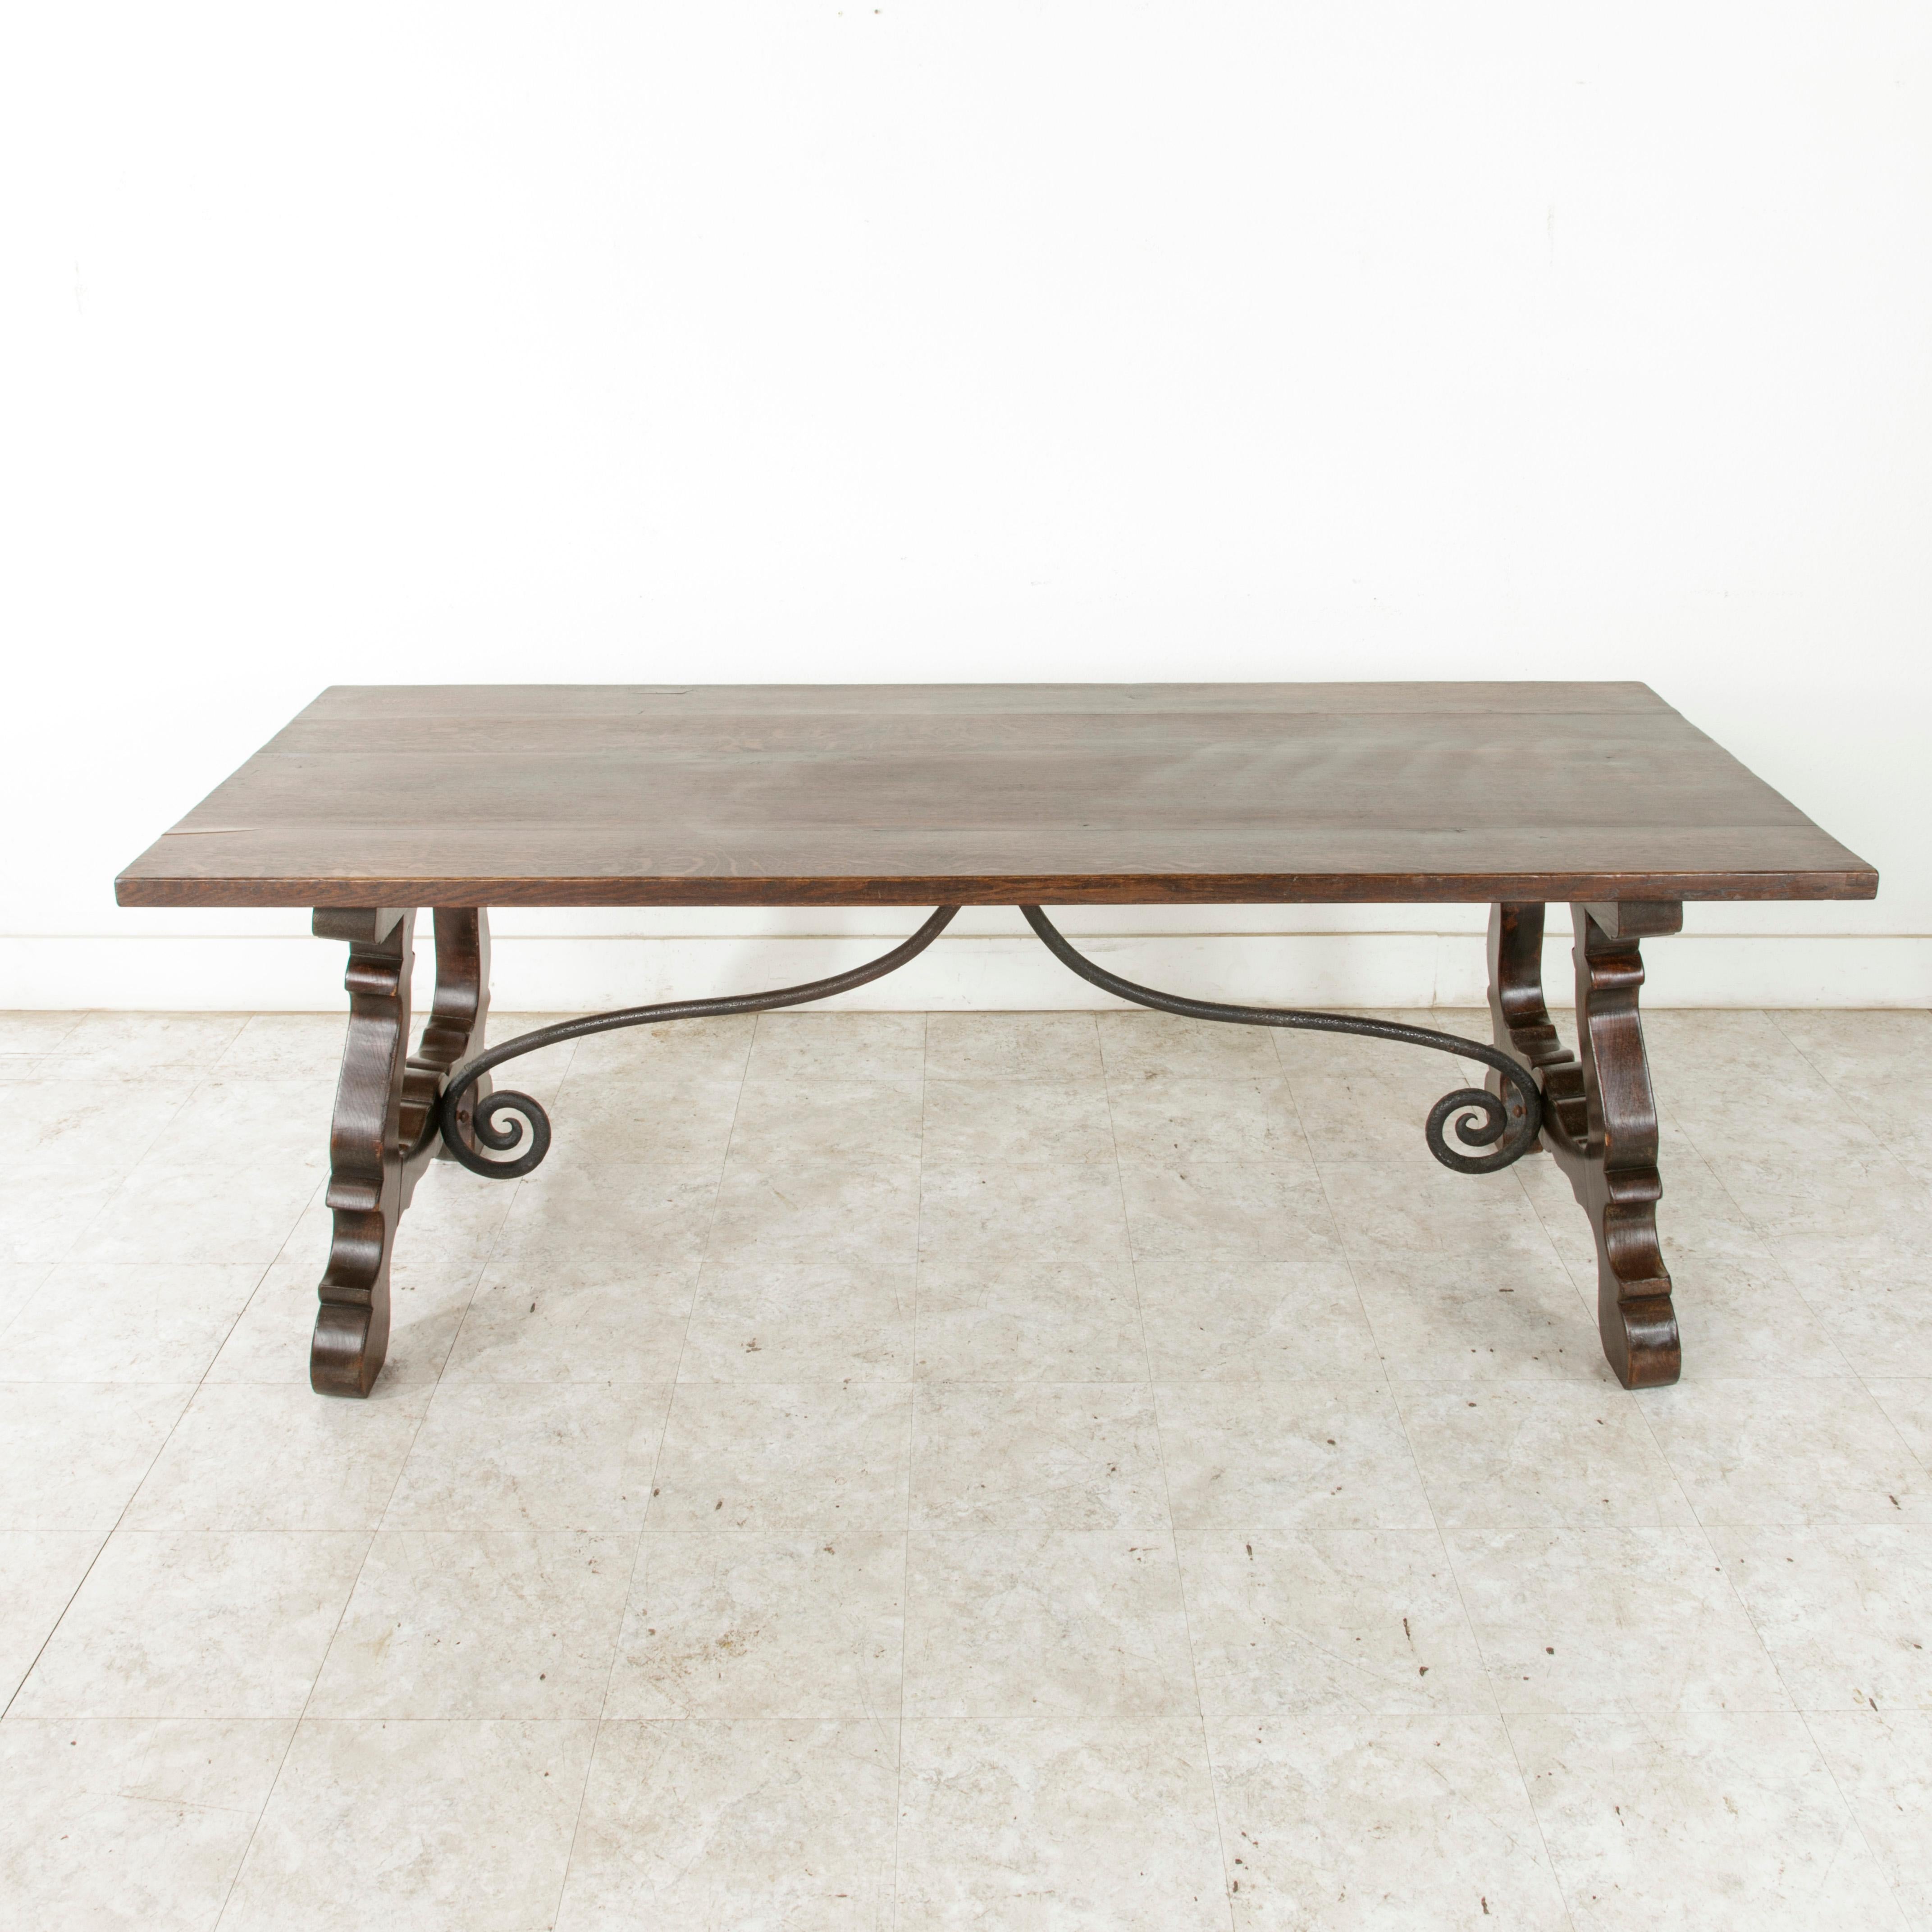 This beautifully carved Spanish Renaissance style dining table features a hand-forged wrought iron trestle. Its thick solid oak construction and dark patina give it a handsome old world feel, while its carved legs and slender trestle allow it to